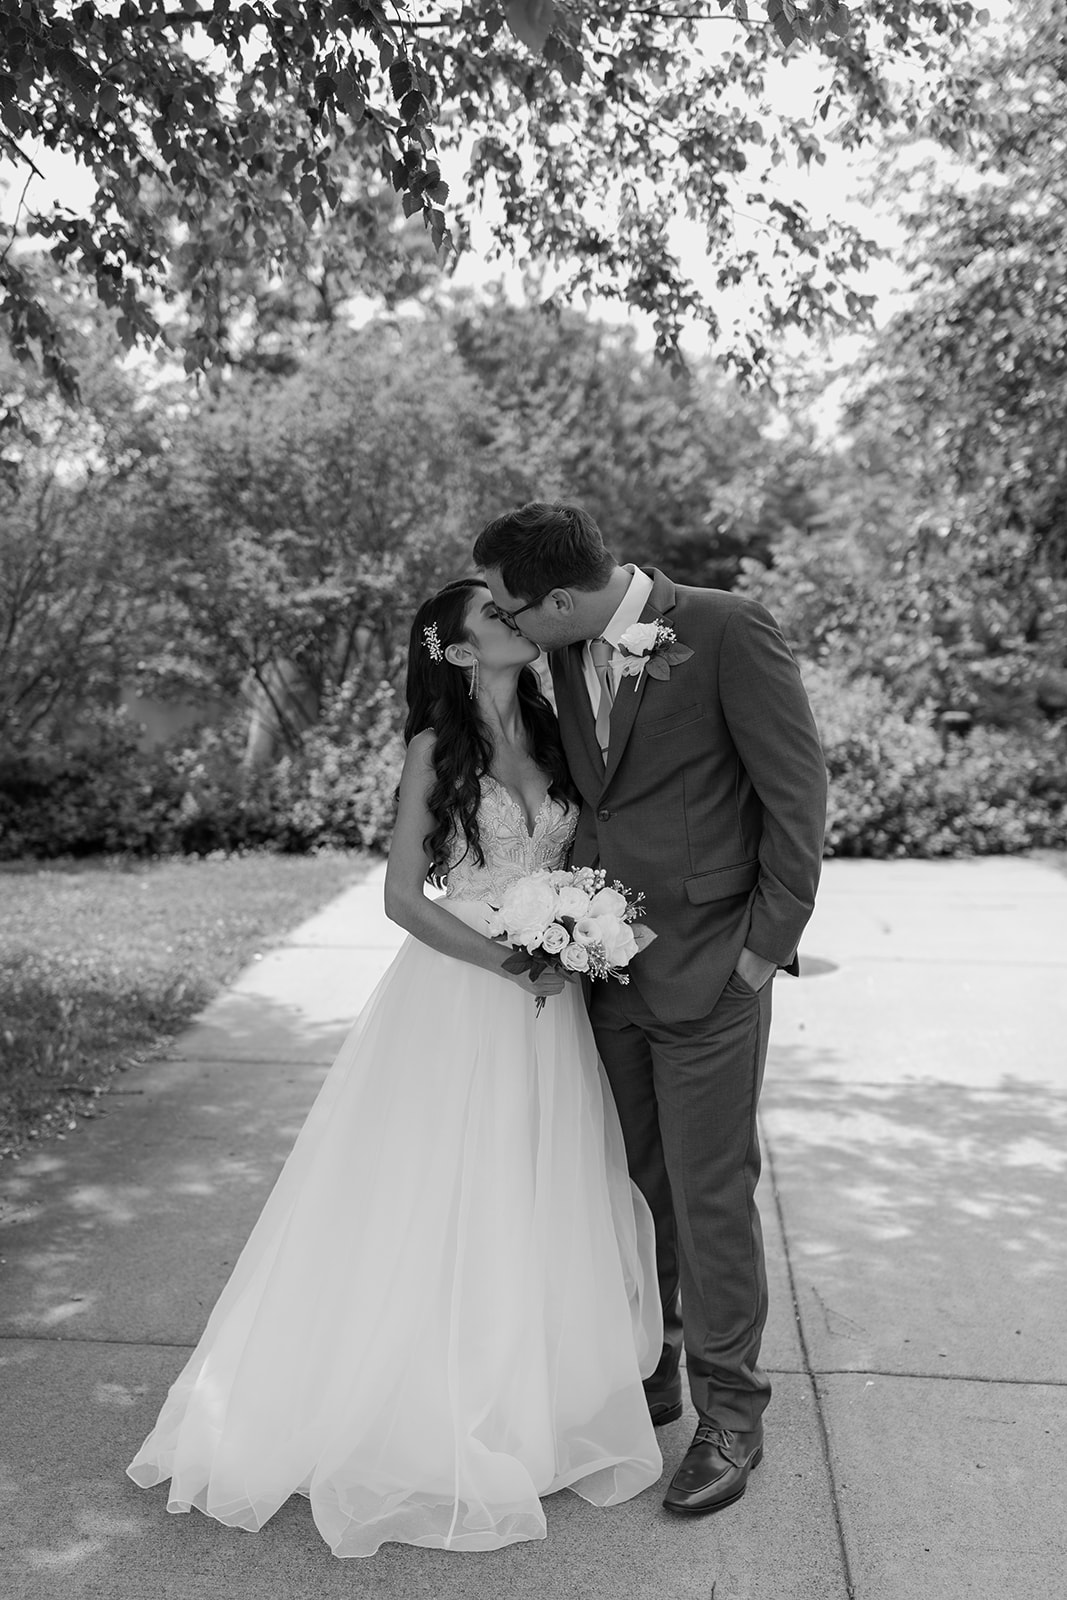 Bride and groom share a kiss in front of some trees